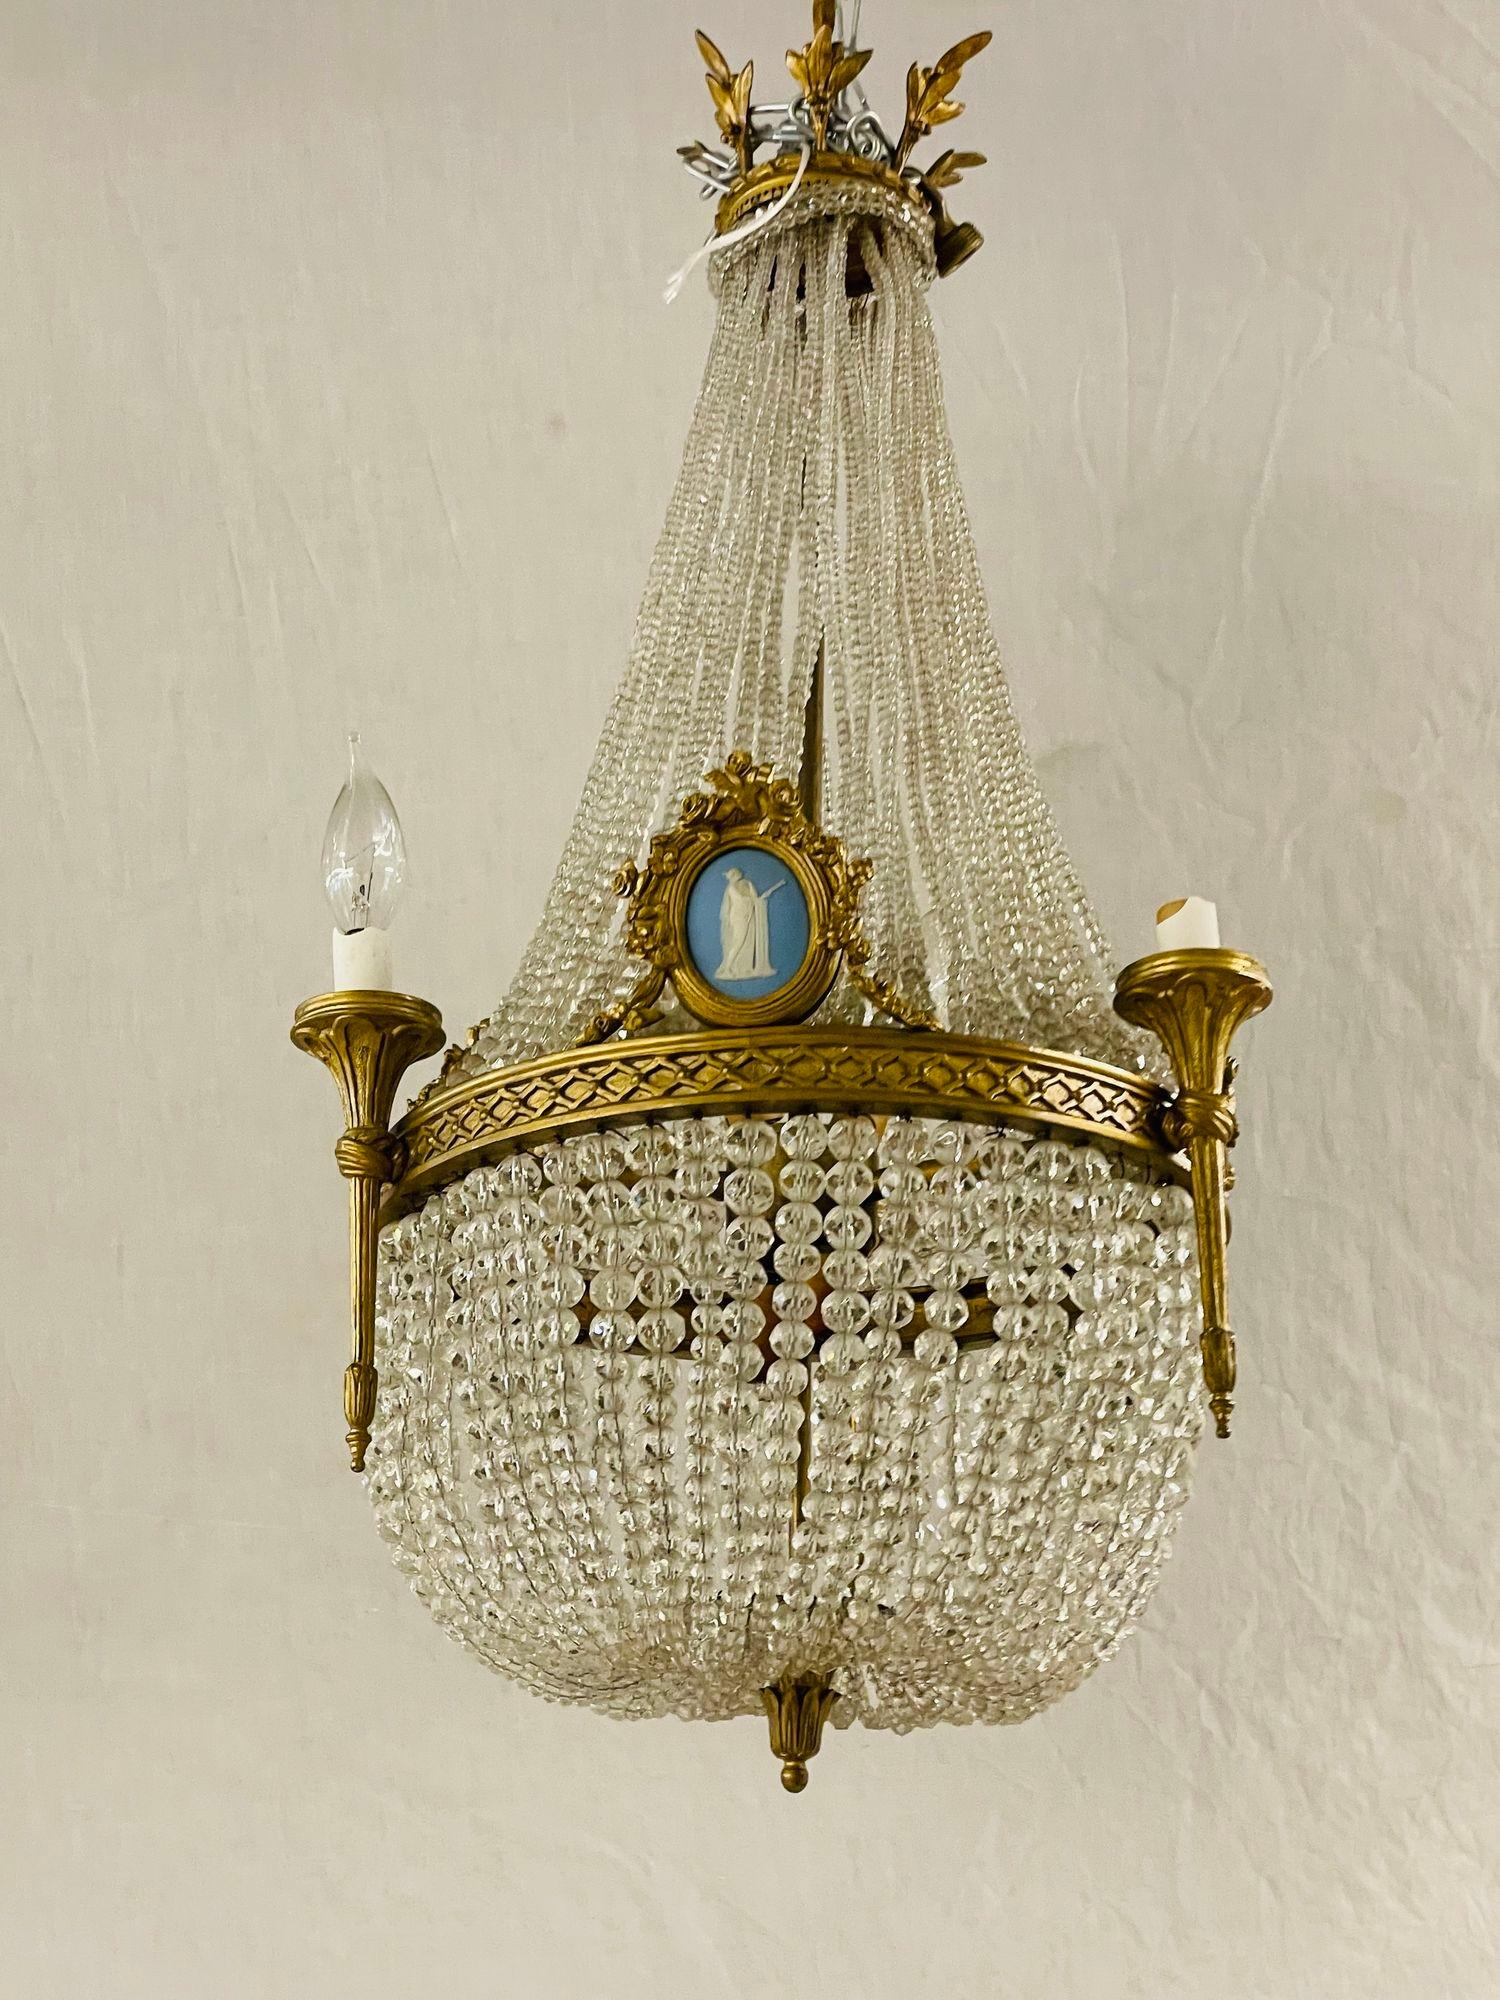 A 19th century gilt bronze chandelier in the Louis XVI Fashion have wedgewood plaques framed in bronze, The whole with crystal swags terminating in a Dore bronze crown.